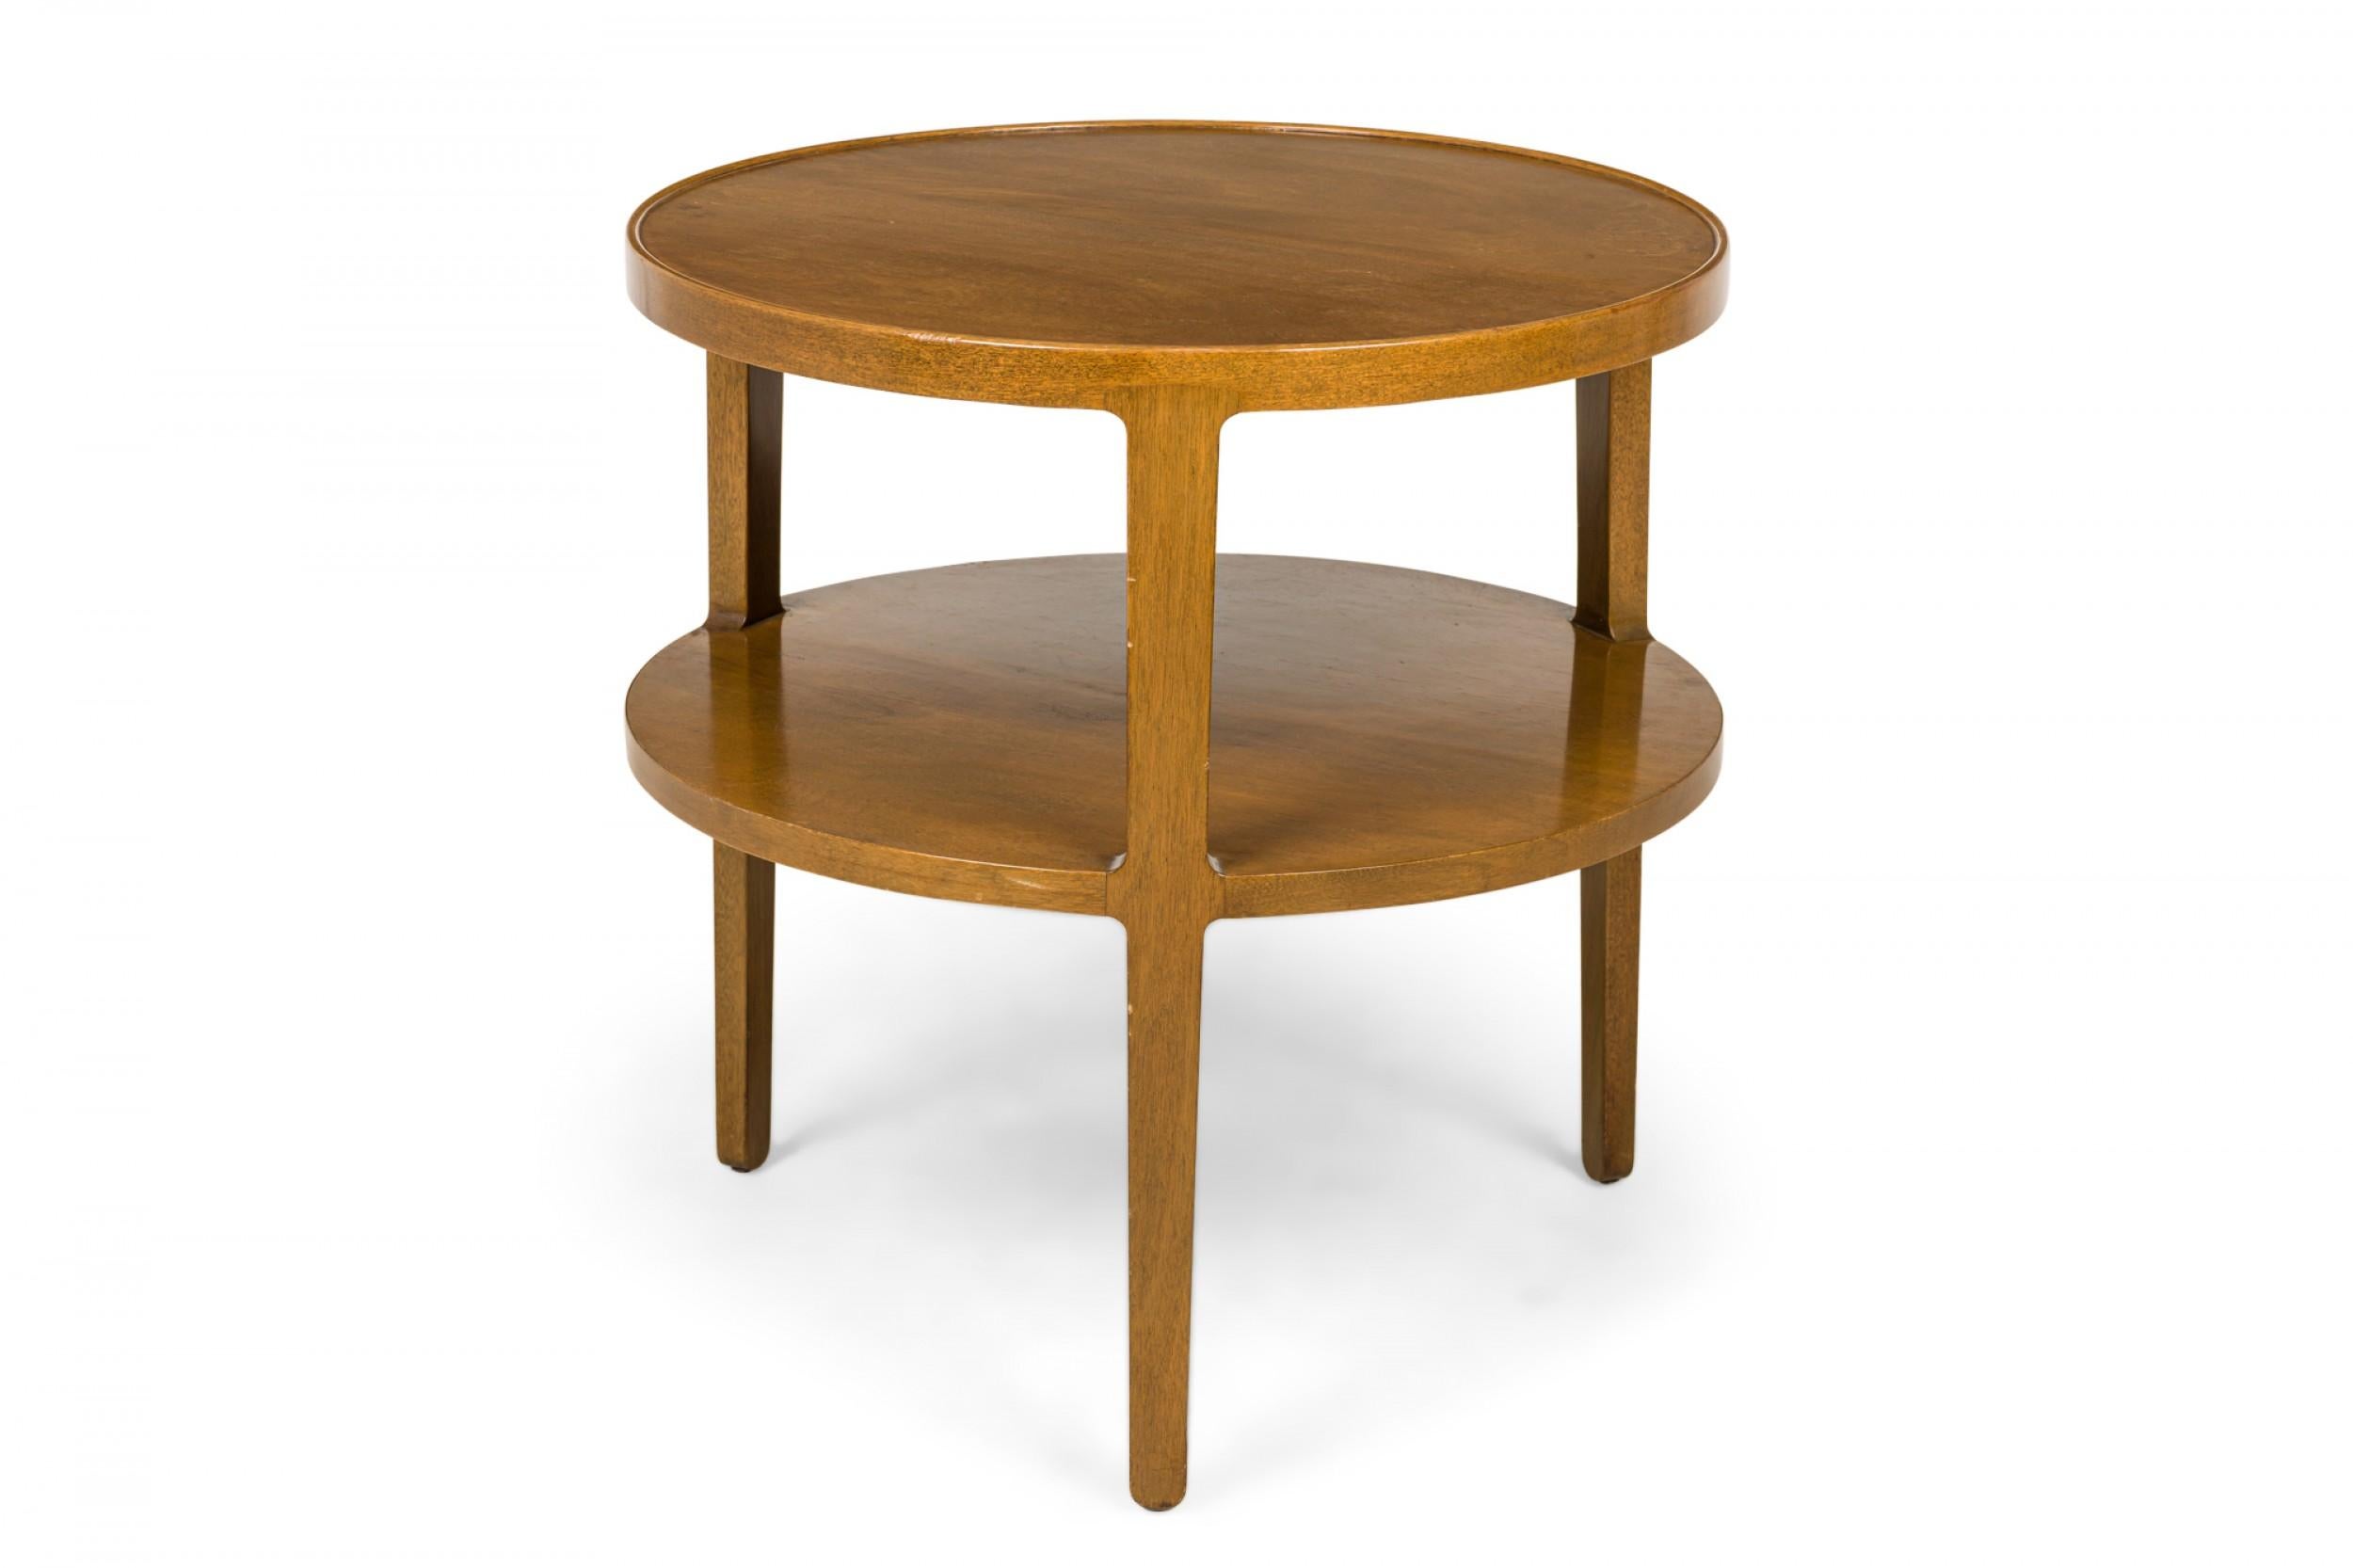 American mid-century circular wooden end / side table with a circular top with shallow lip above an identical stretcher shelf supported on the exterior by three tapered square legs. (EDWARD WORMLEY FOR DUNBAR FURNITURE COMPANY)